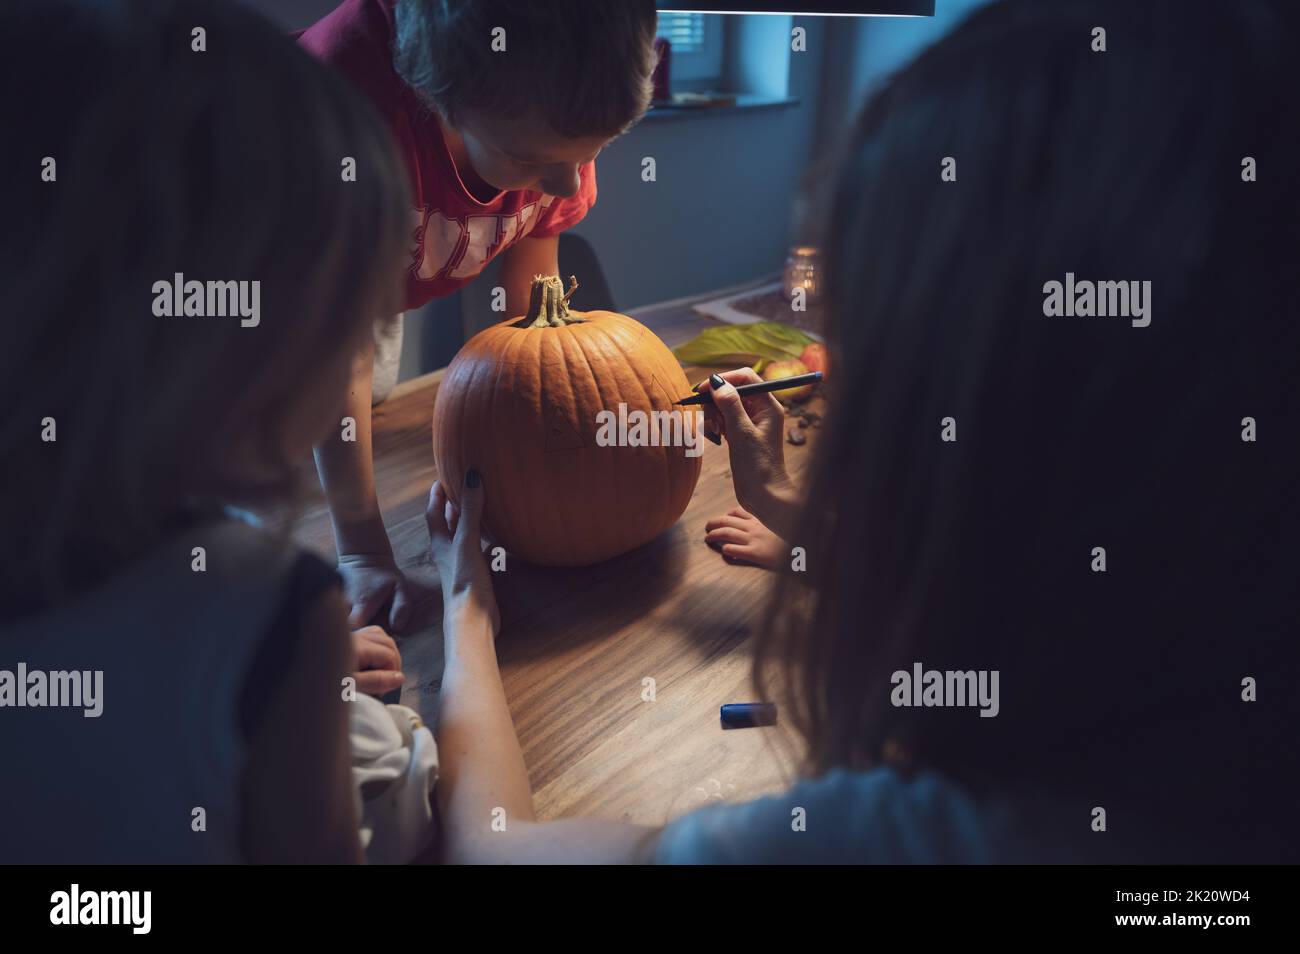 Mother and her three children drawing on a pumpkin to carve it for halloween holidays. Stock Photo